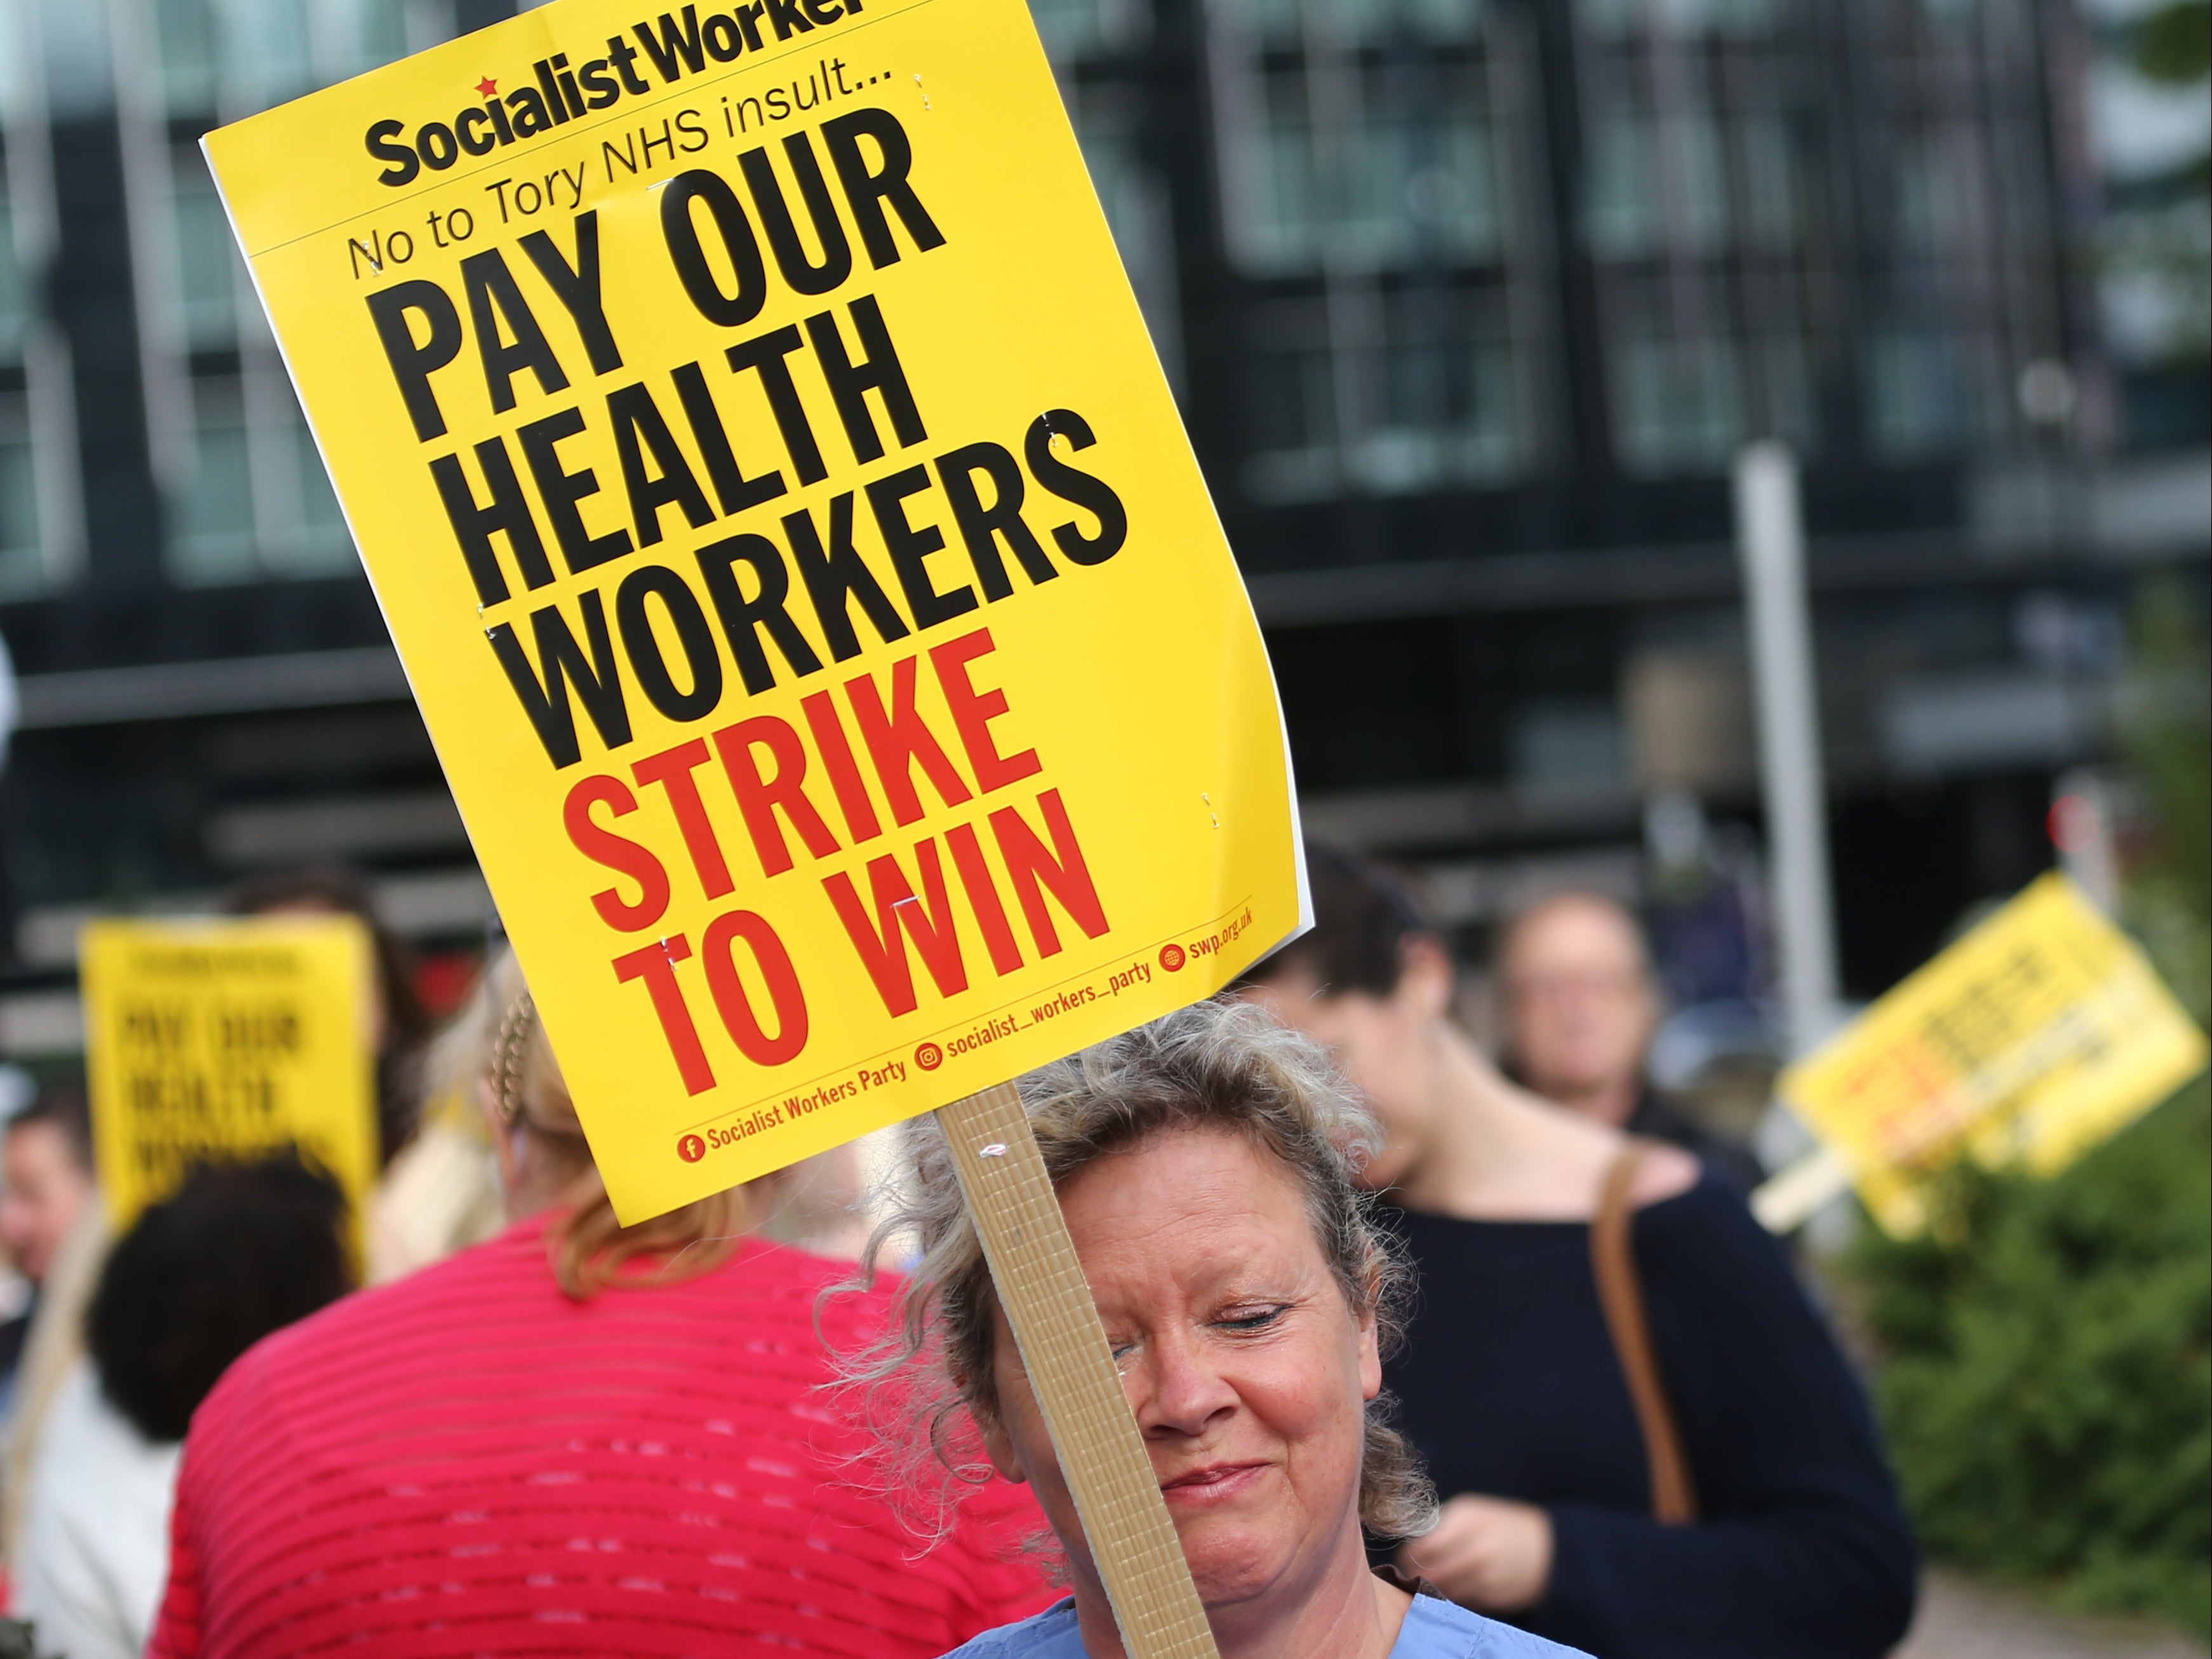 NHS workers demonstrate, demanding pay rise and better working conditions in London.